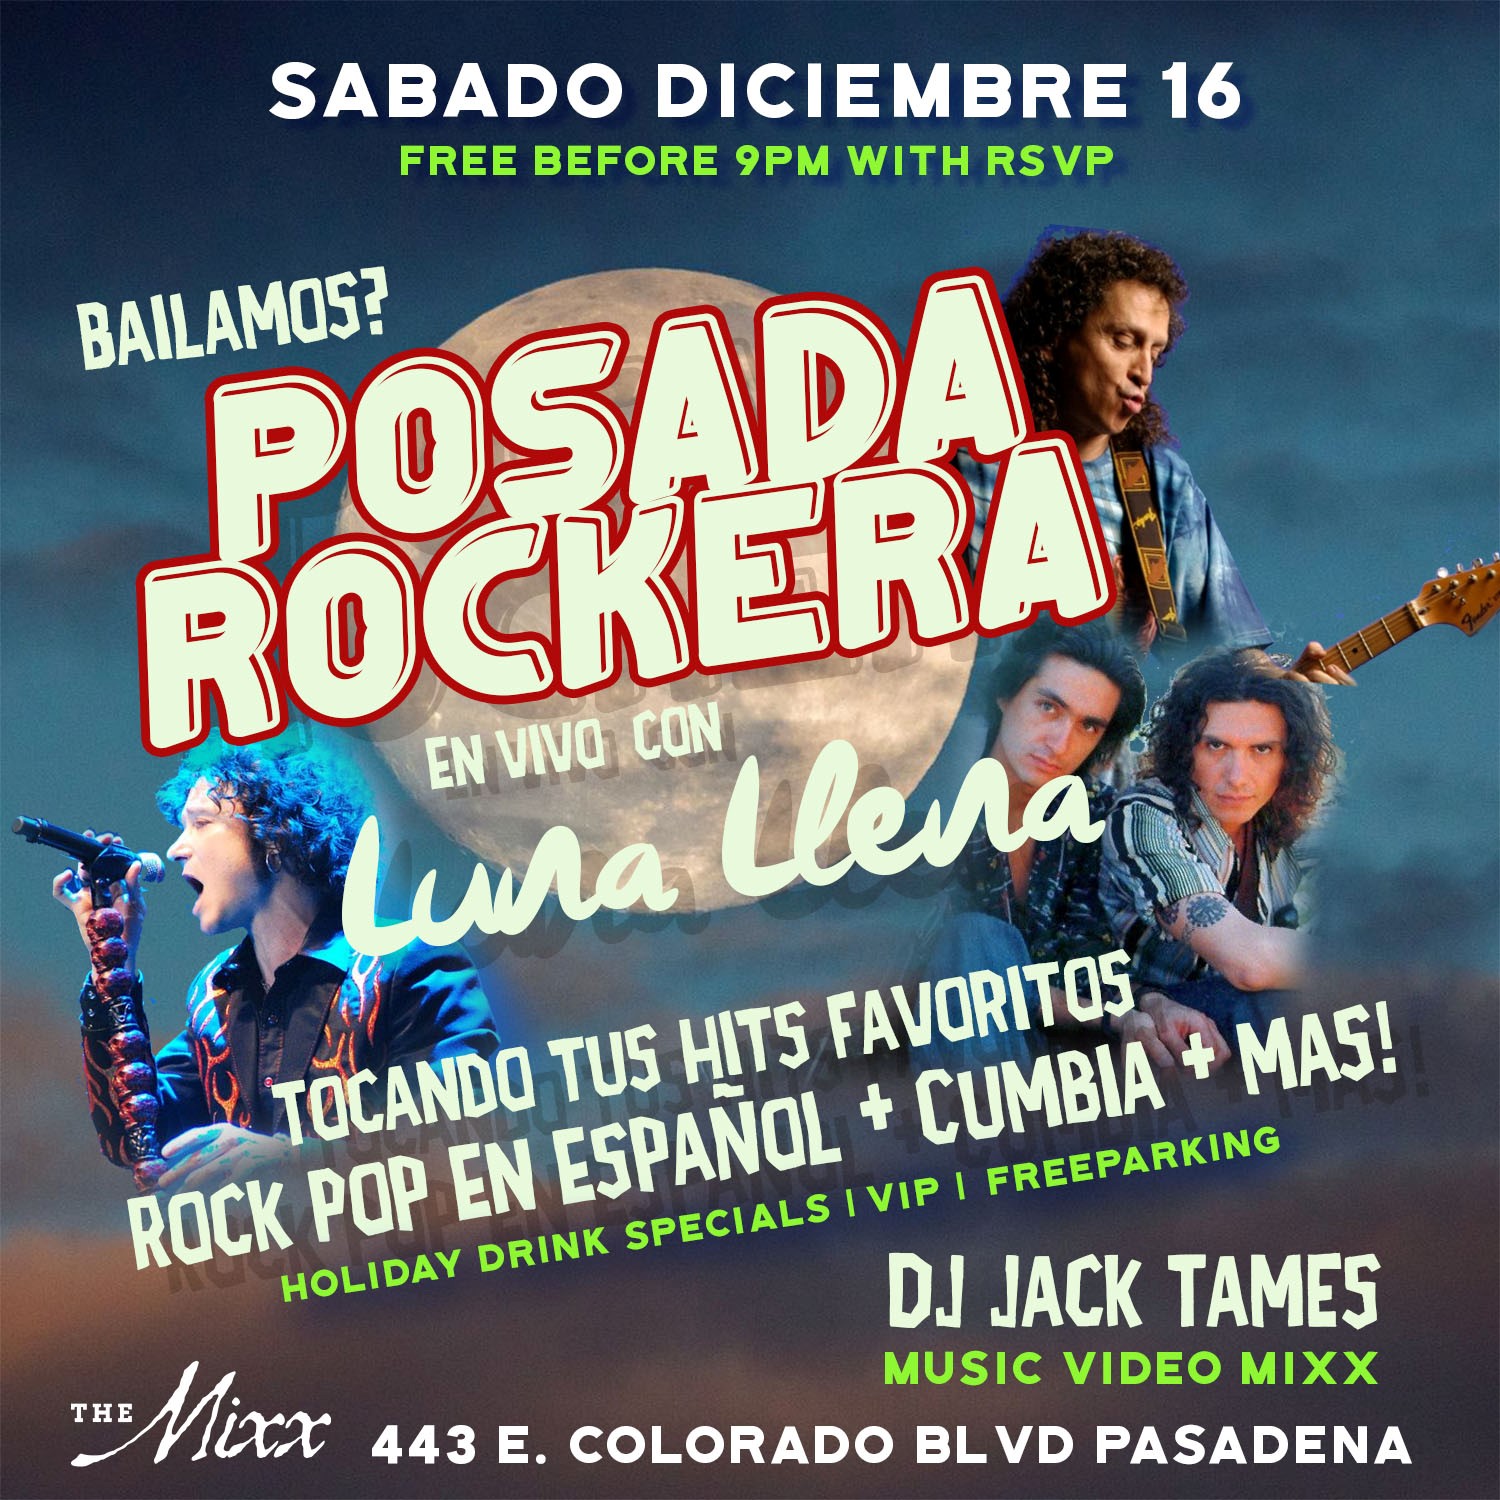 You are currently viewing Holiday Posada Rockera with Luna llena Live on Stage